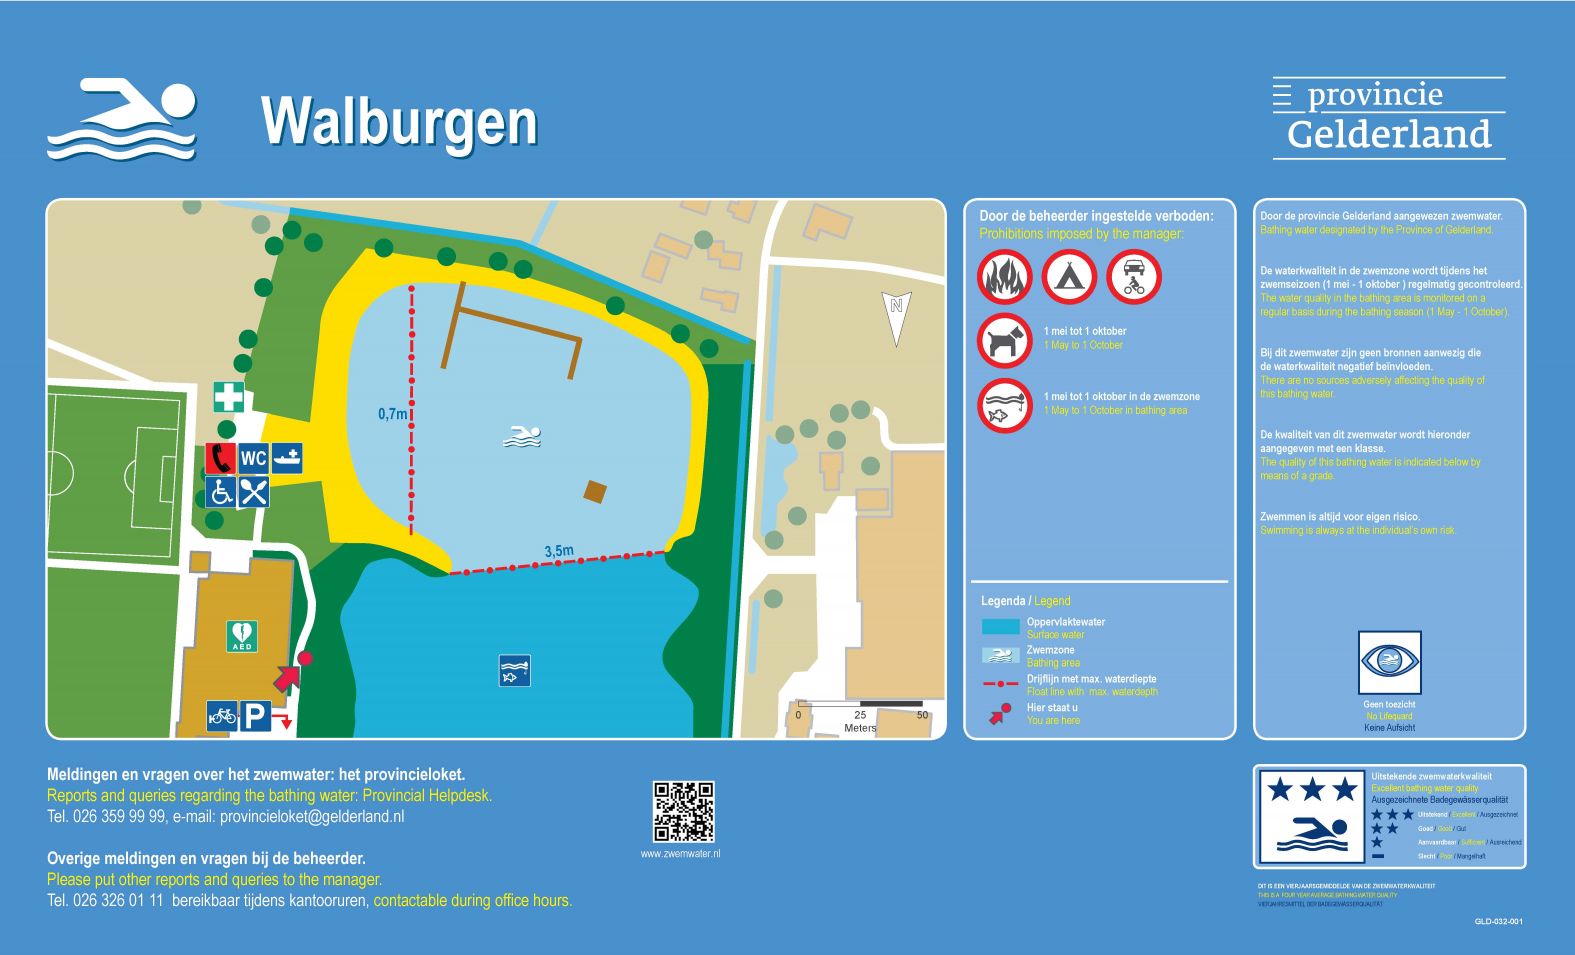 The information board at the swimming location Walburgen